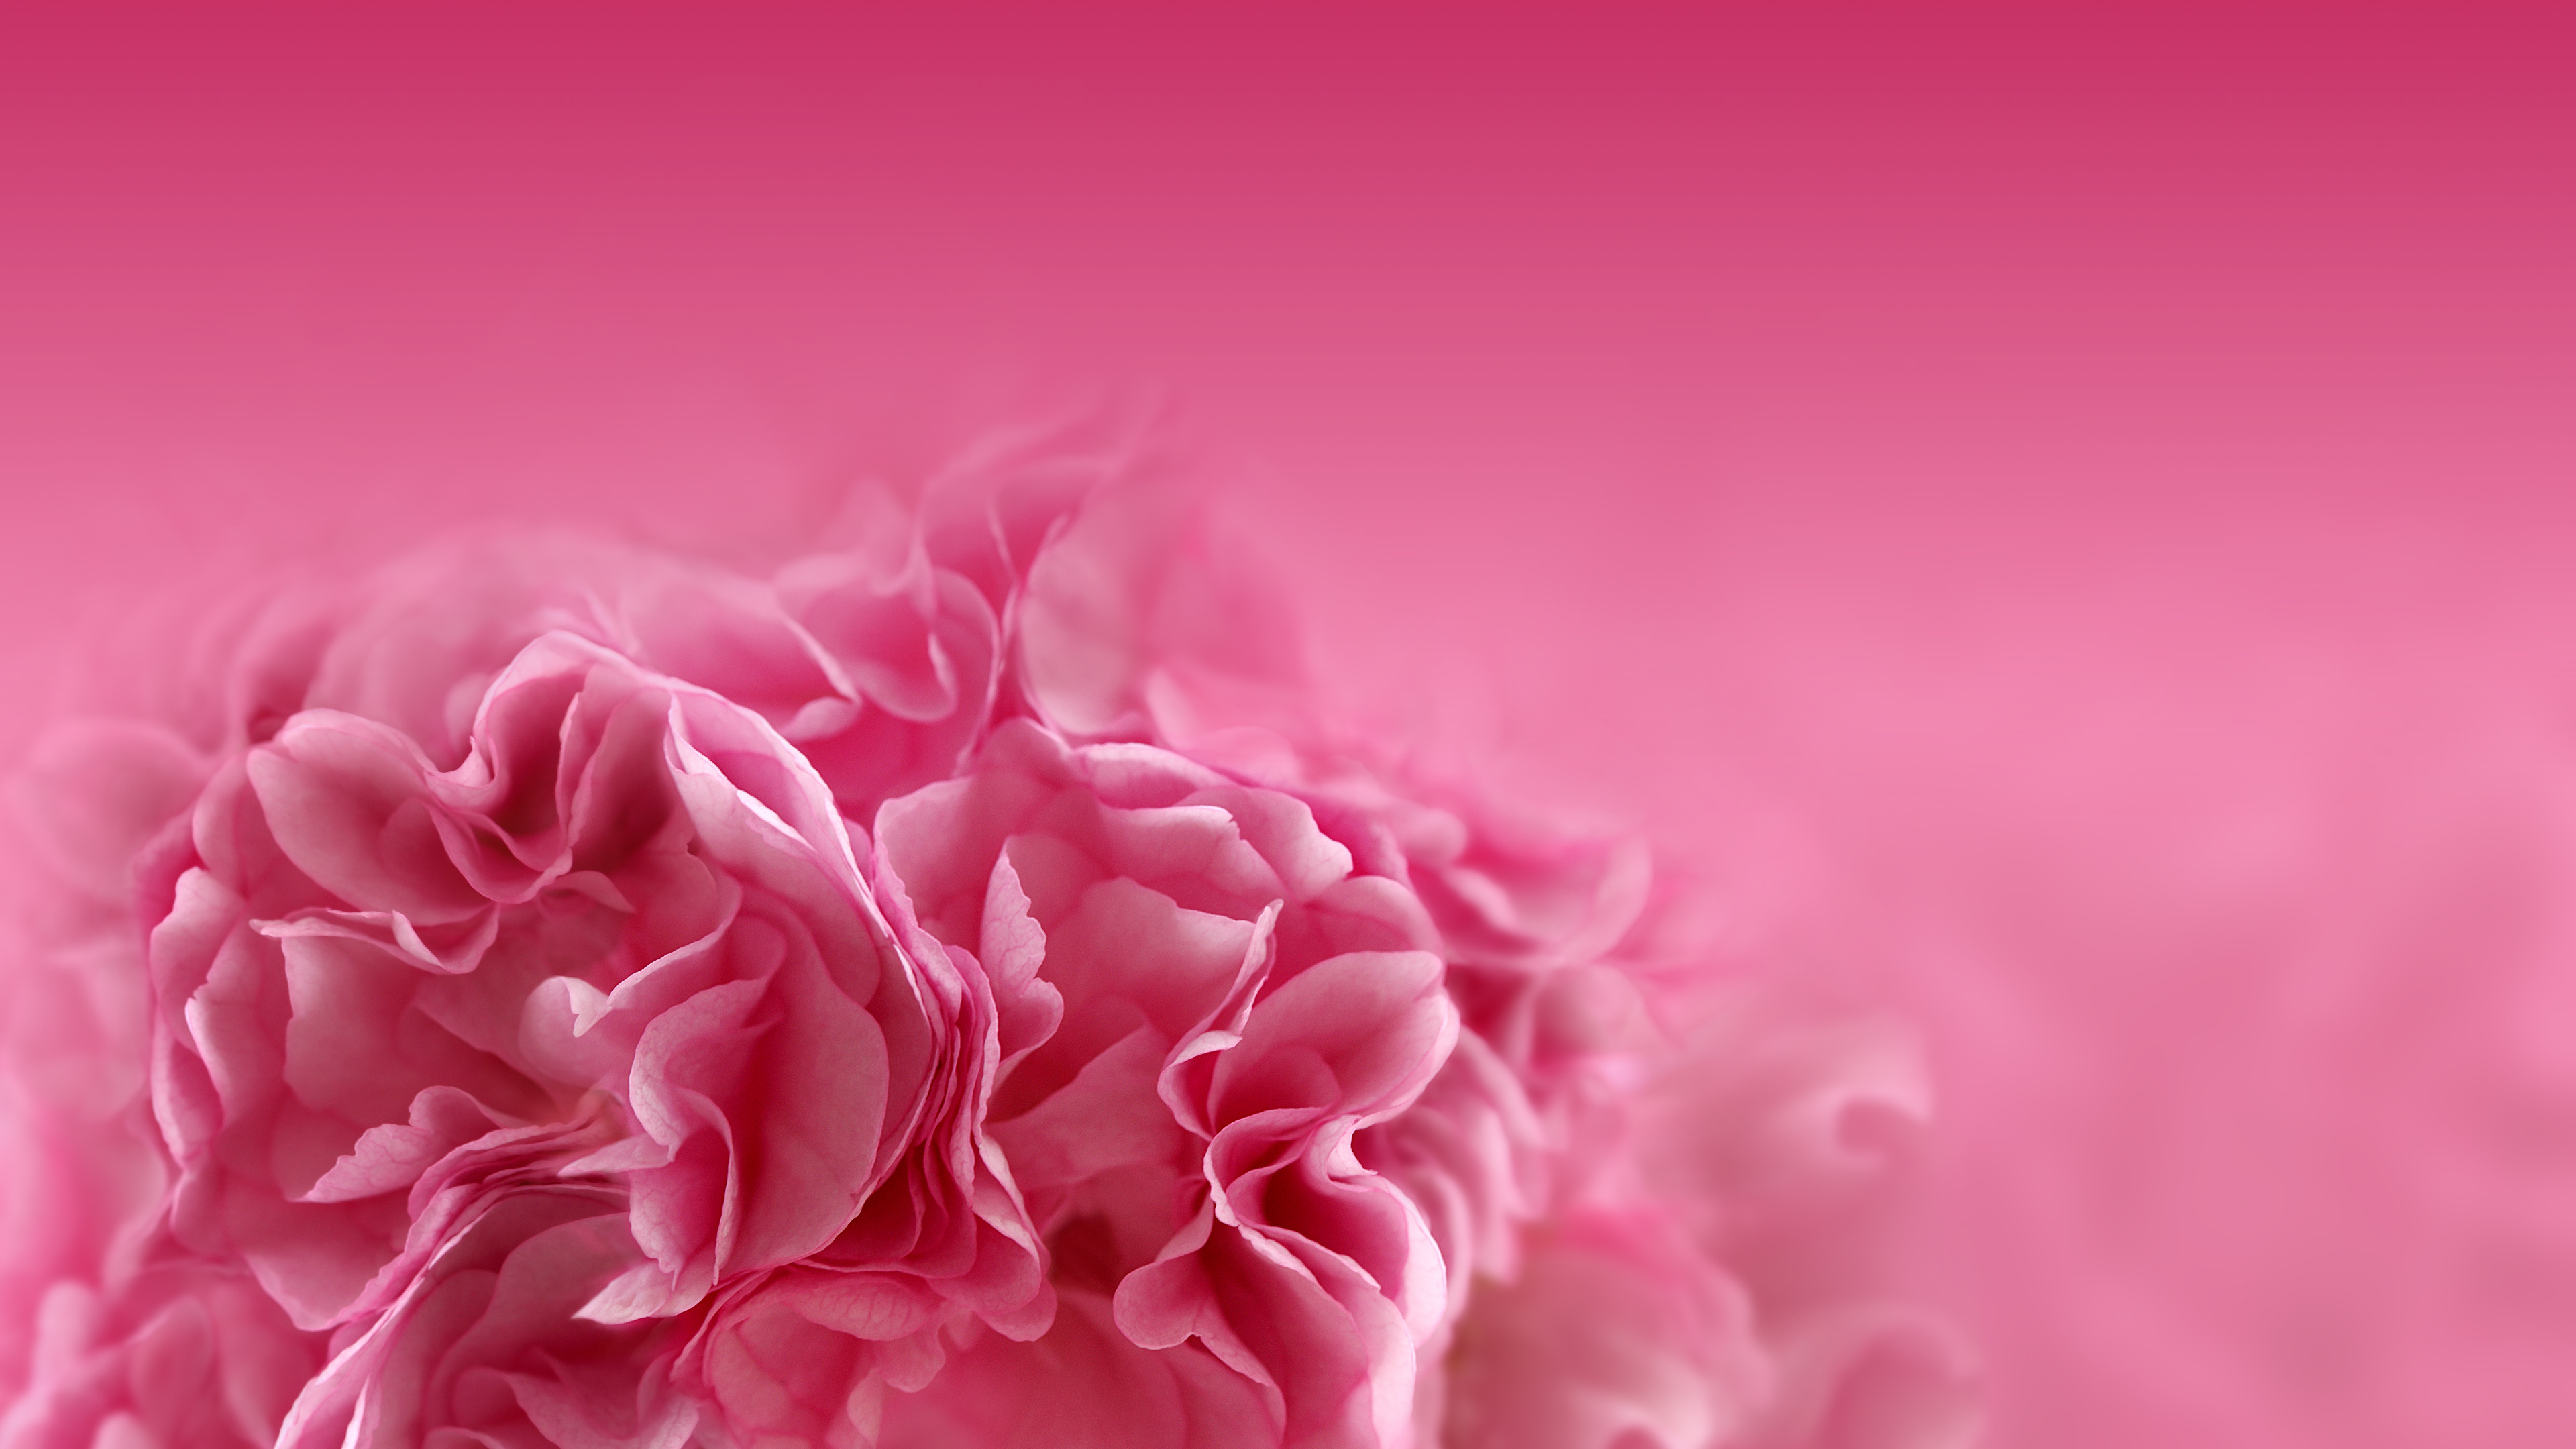 Pink Rose in Close up Photography. Wallpaper in 3840x2160 Resolution